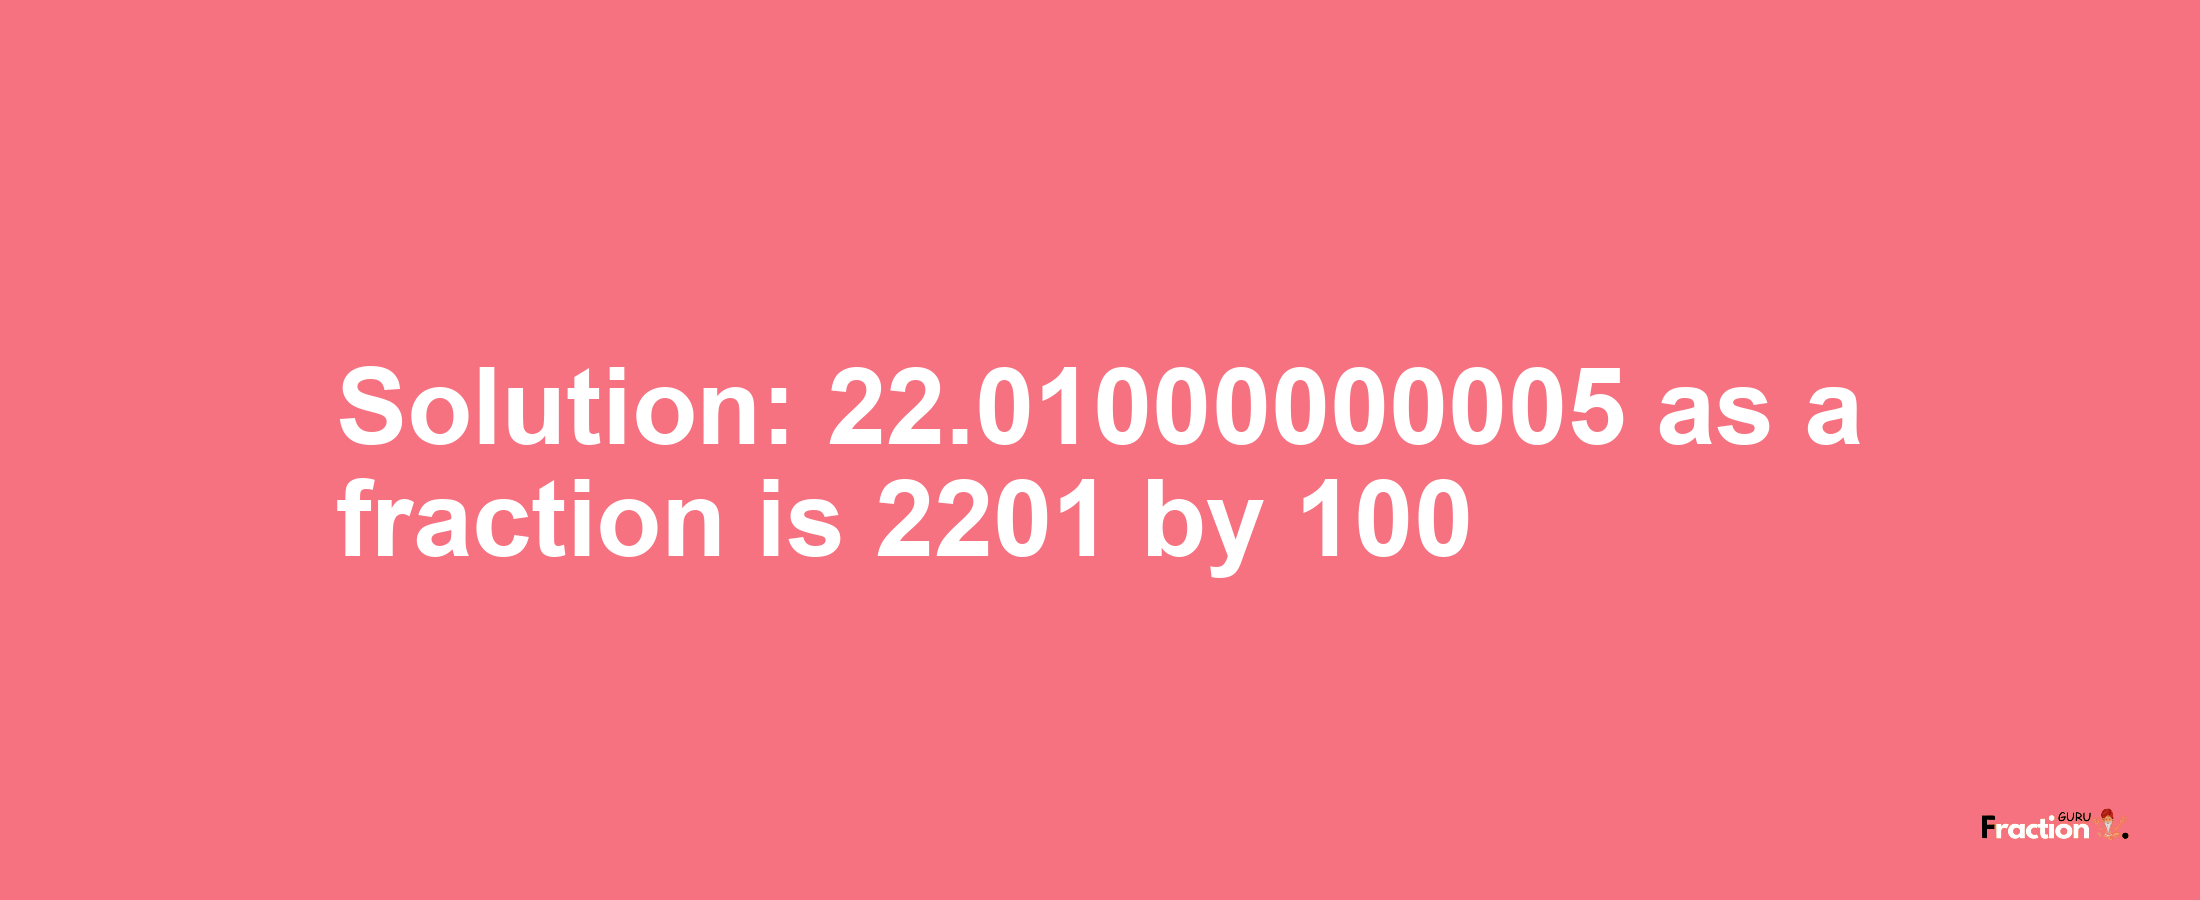 Solution:22.01000000005 as a fraction is 2201/100